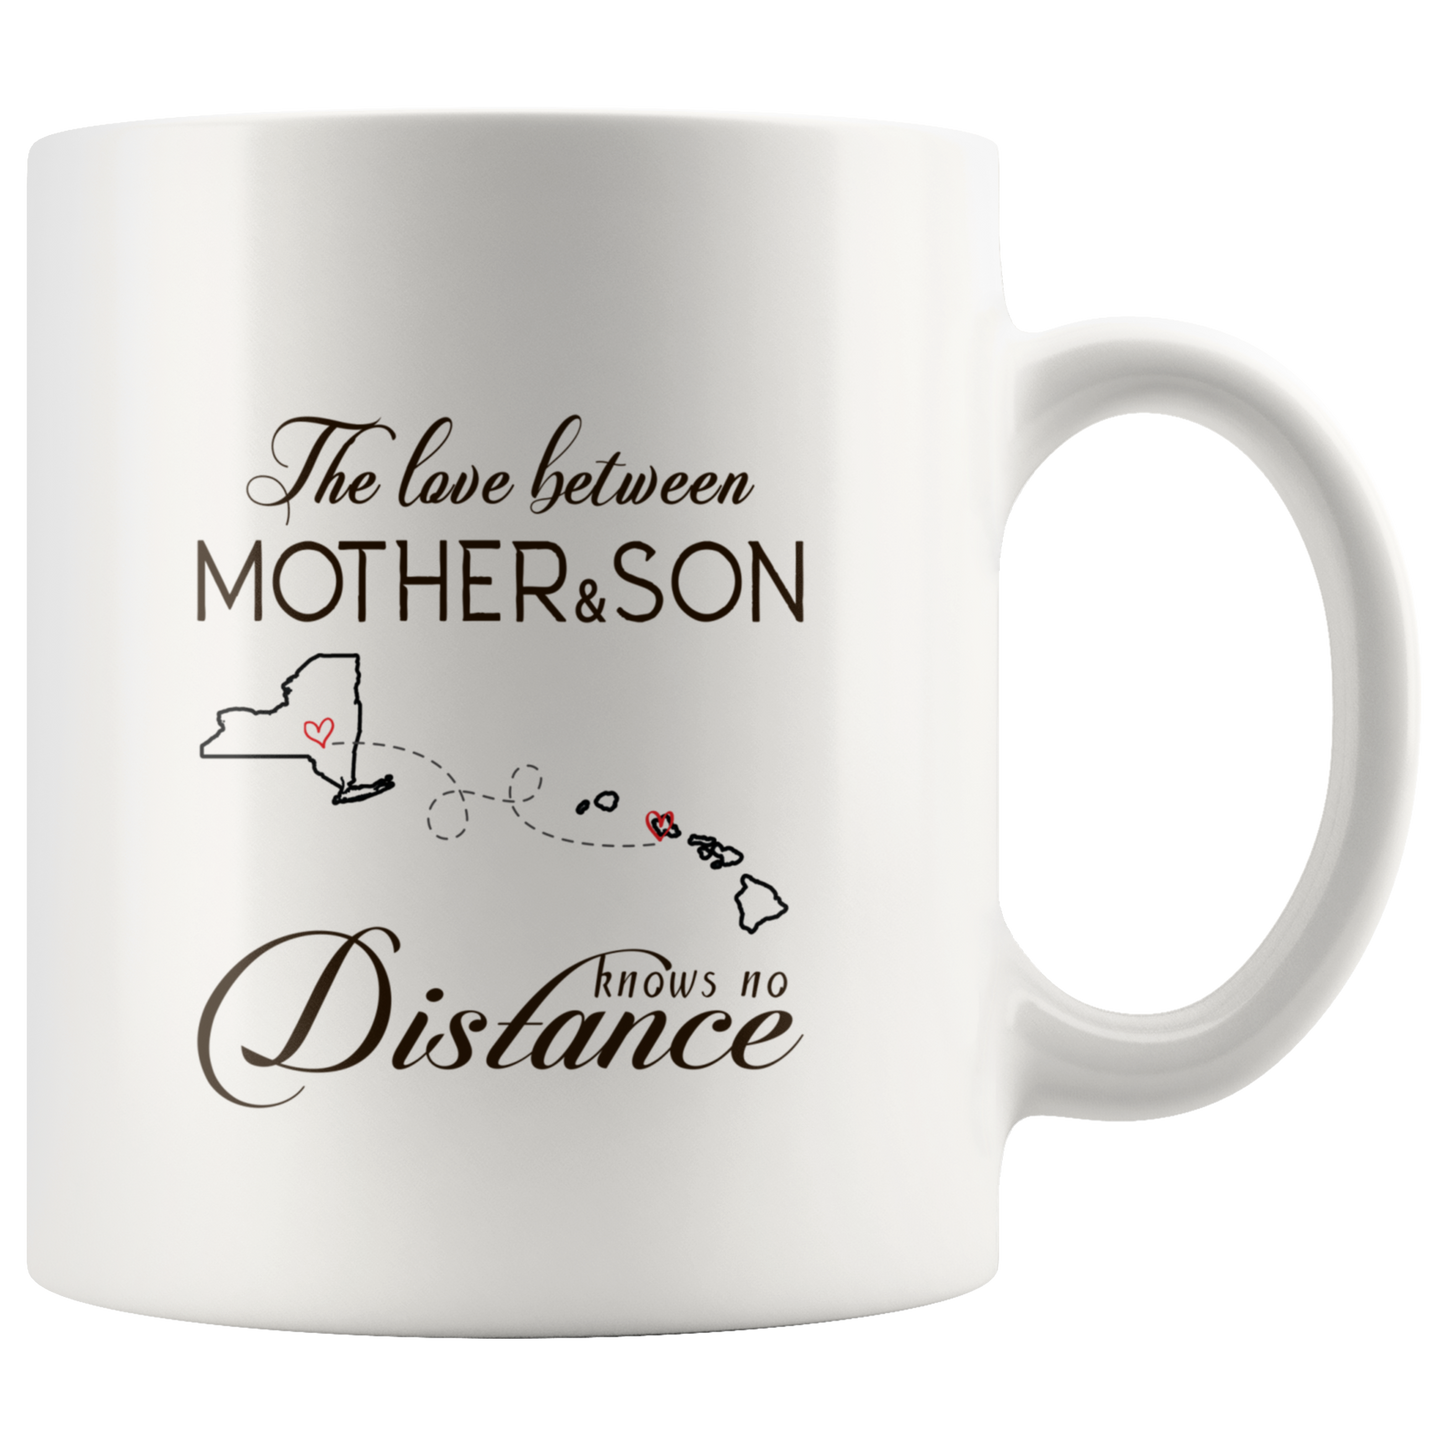 ND-21335644-sp-23489 - Long Distance Accent Mug 11 oz Red - The Love Between Mother